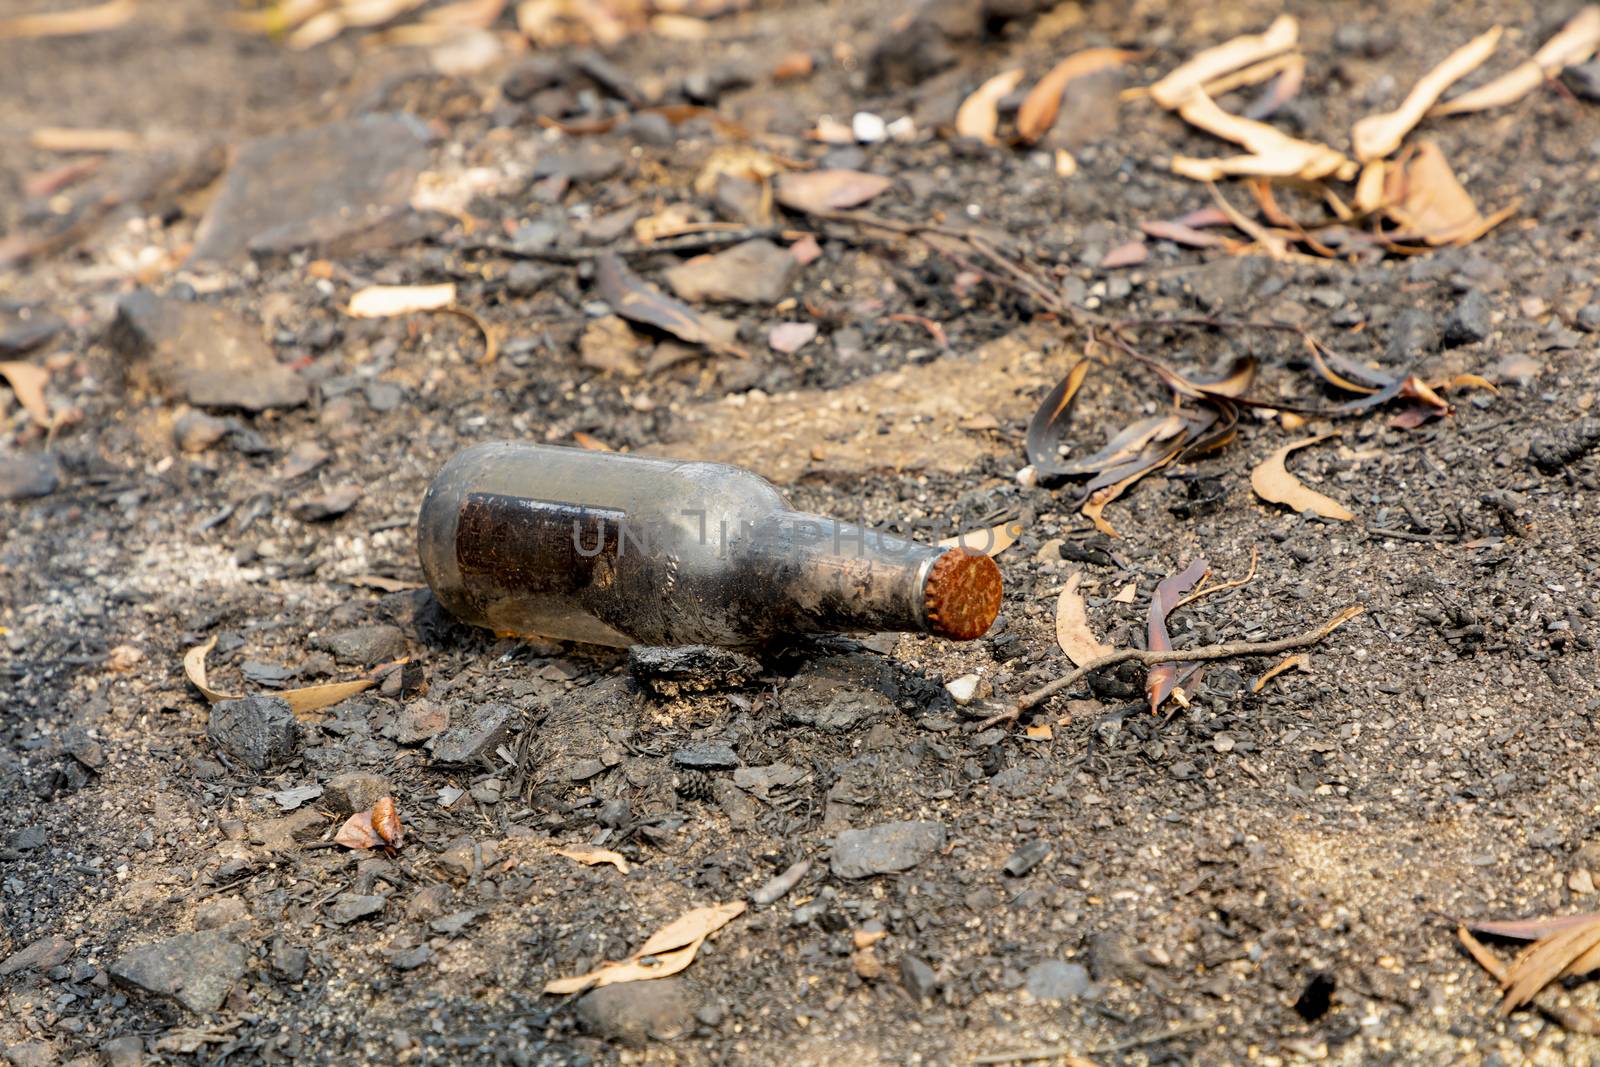 A glass drinking bottle on the ground after bushfires in regional Australia by WittkePhotos